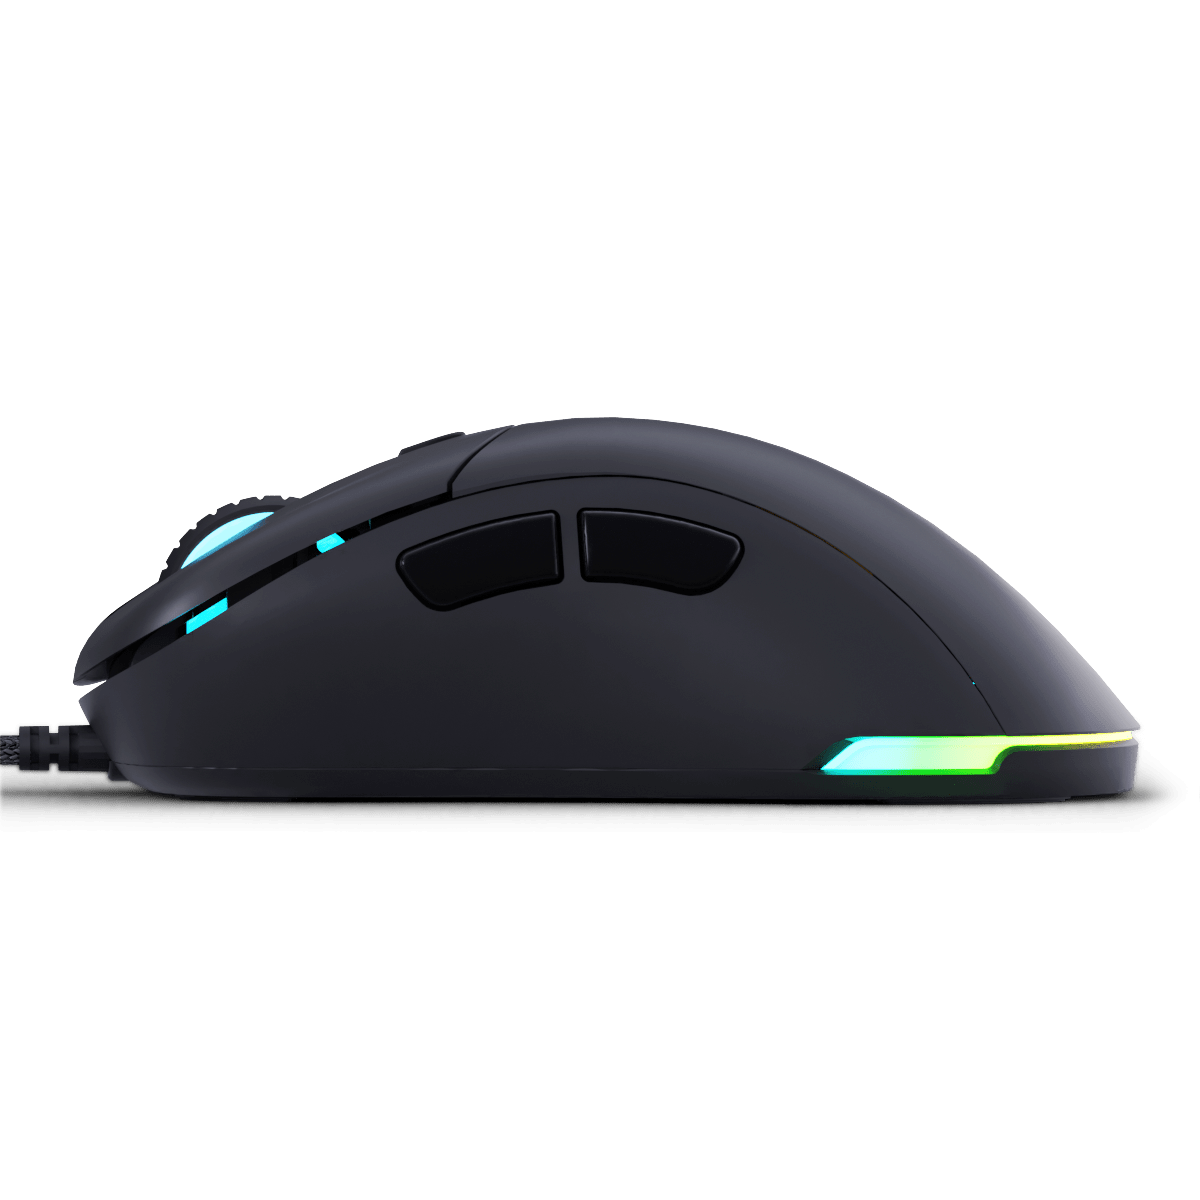 Pro Gaming Mouse Guide  The Official Site of 1337 Pwnage